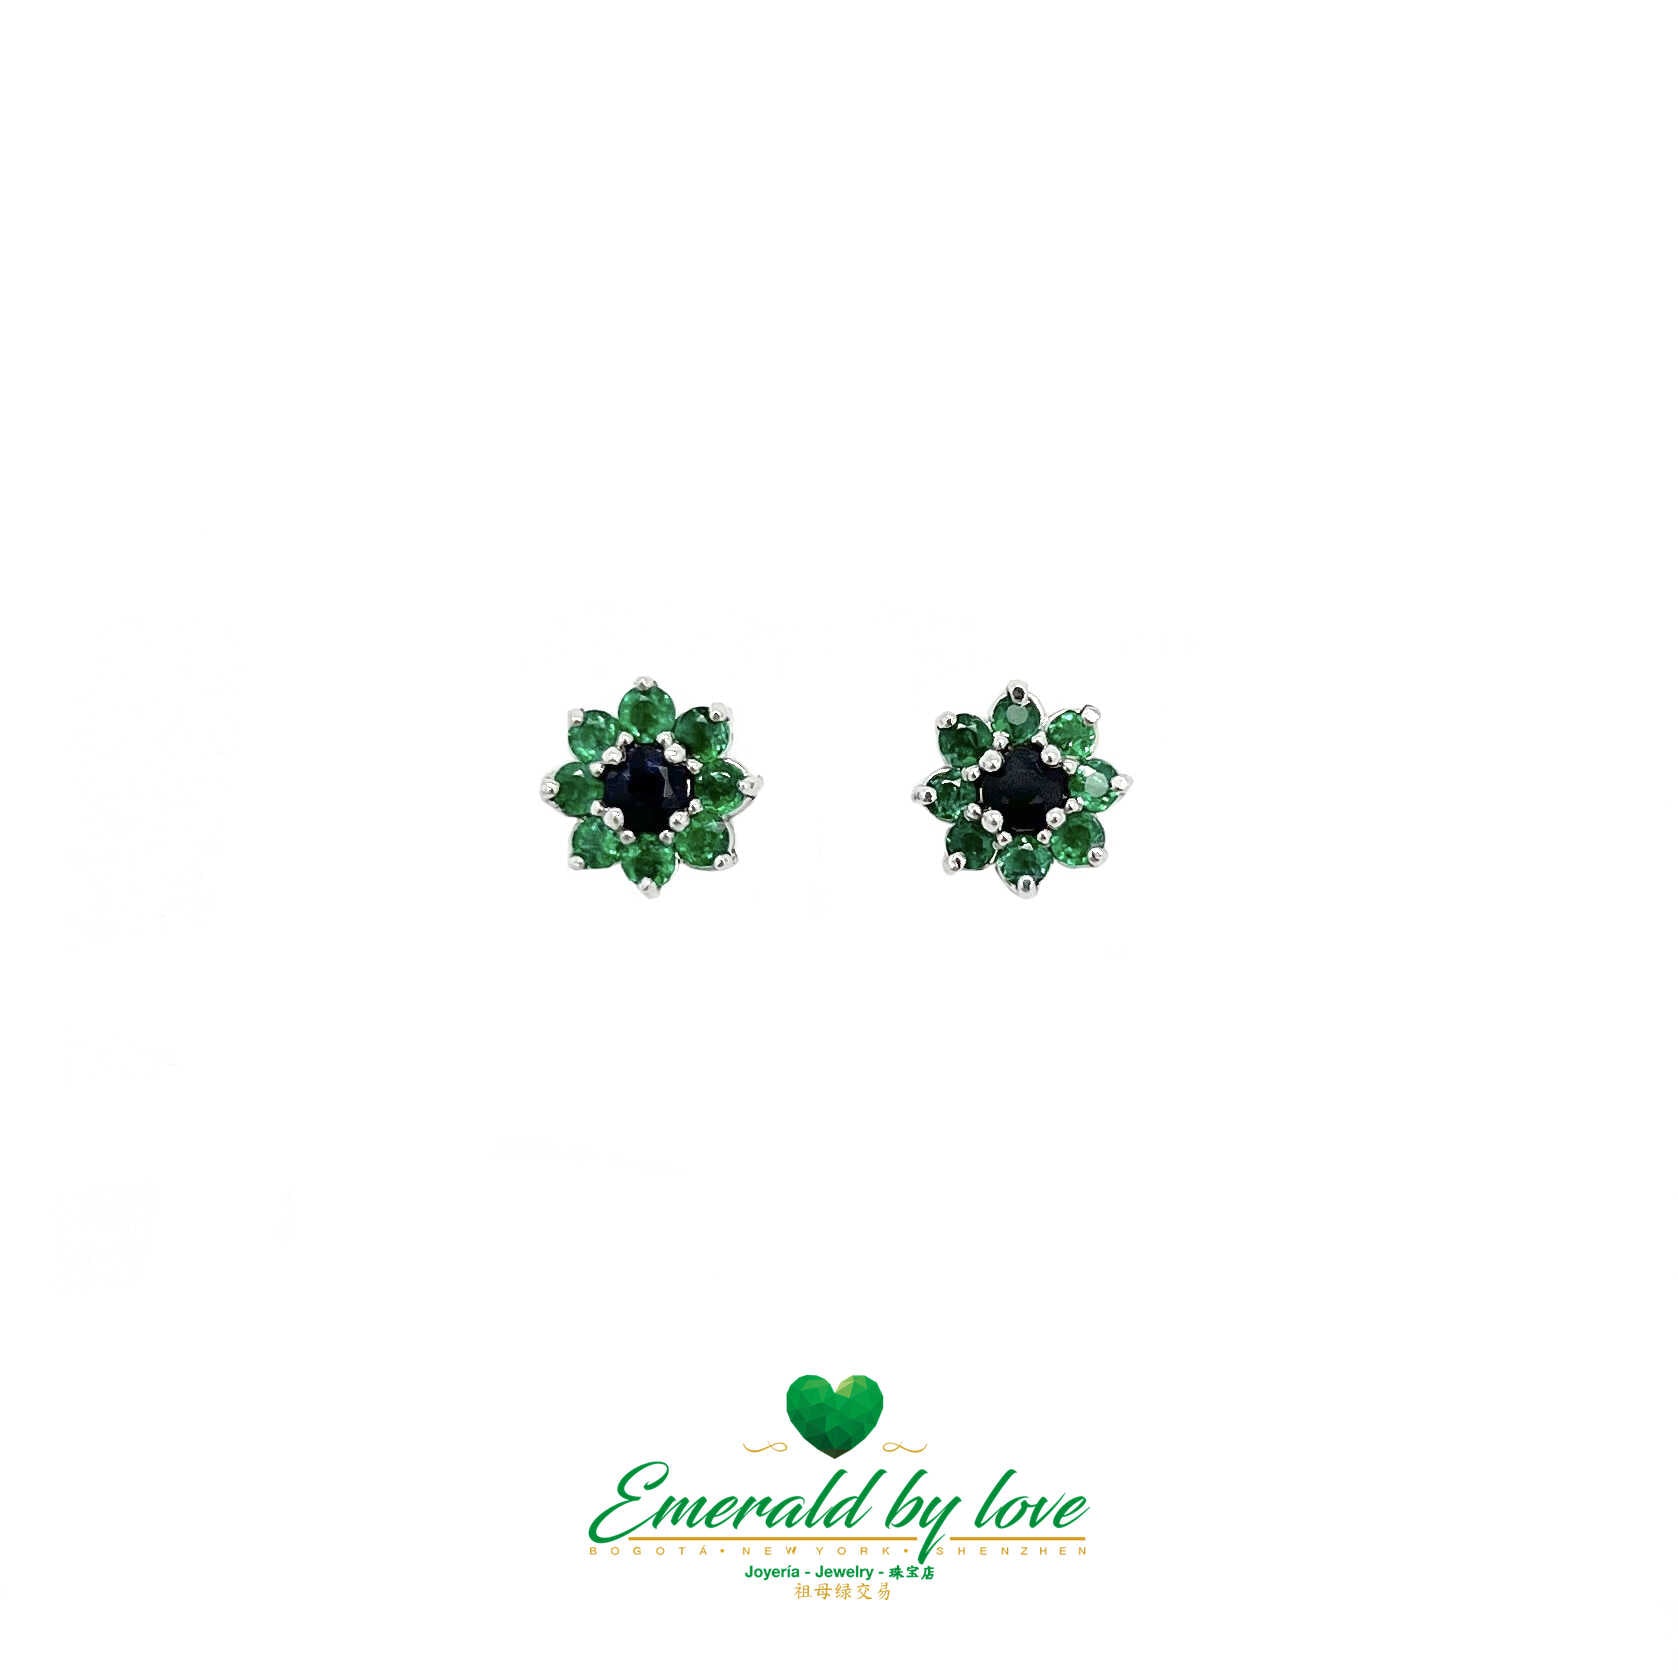 Whimsical Blooms - 18k White Gold Floral Earrings with Sapphires (0.33 CT) and Round Emeralds (0.43 CT)